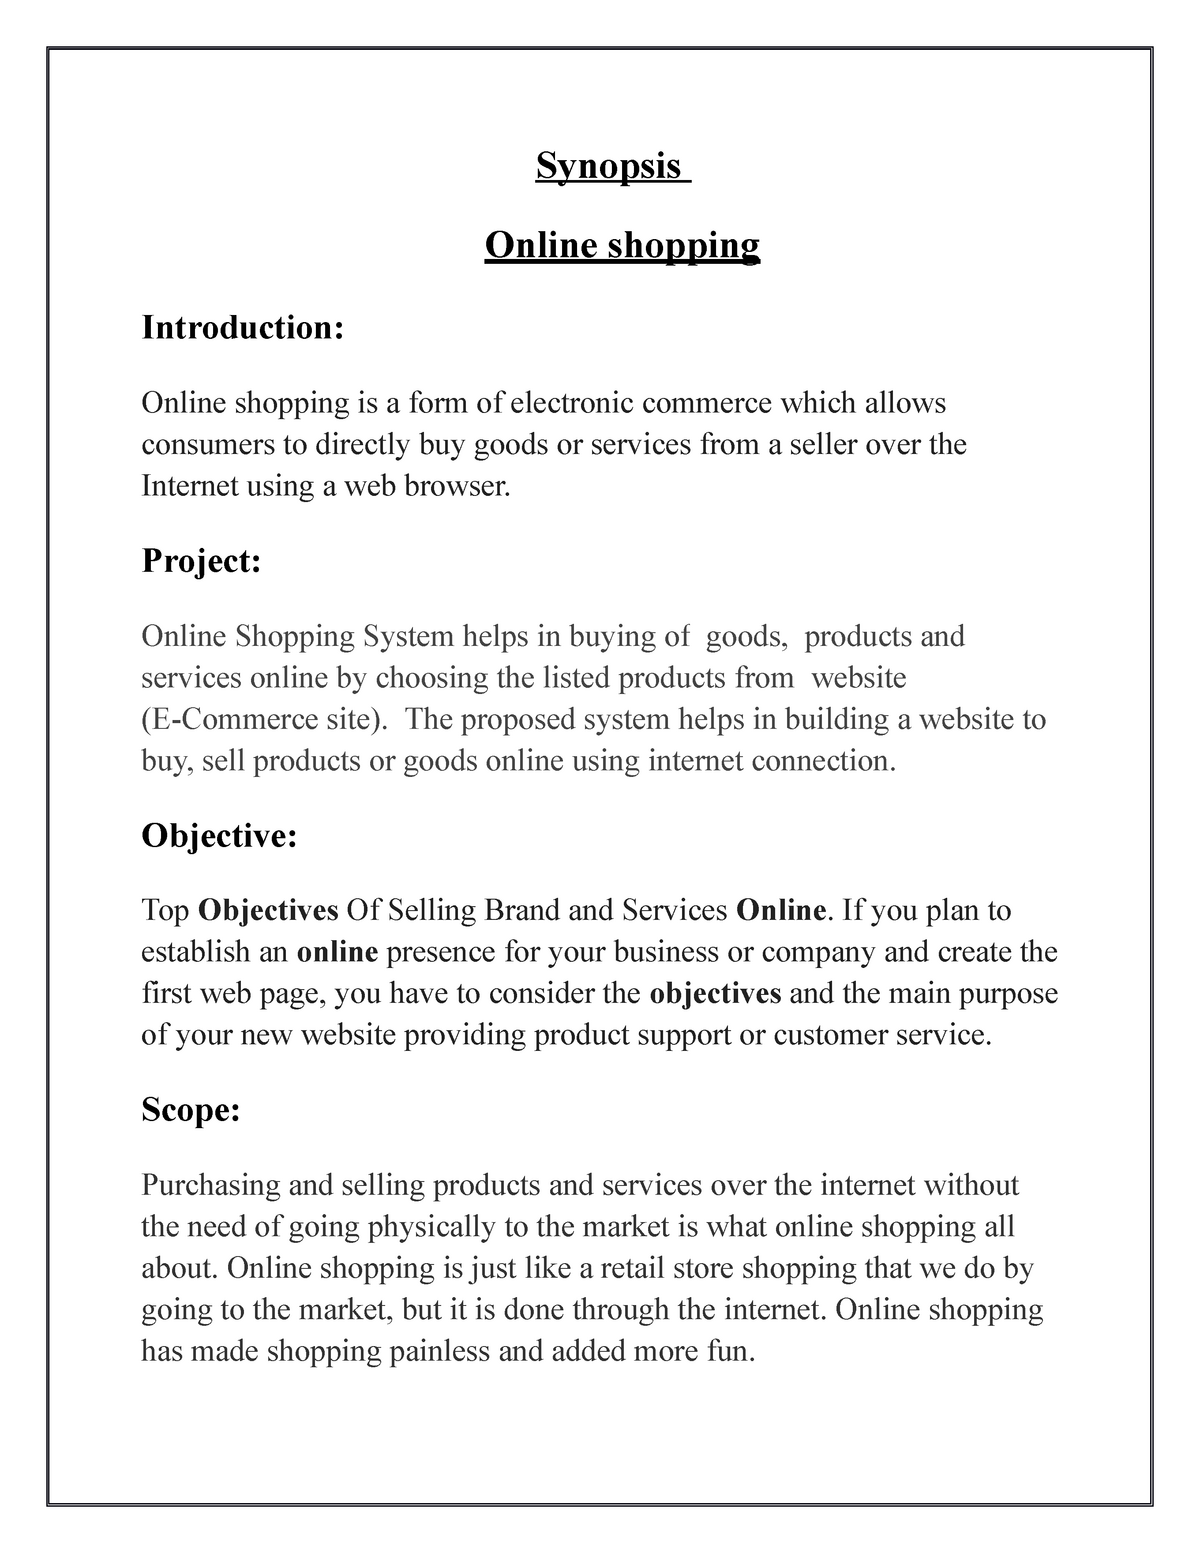 introduction of online shopping research